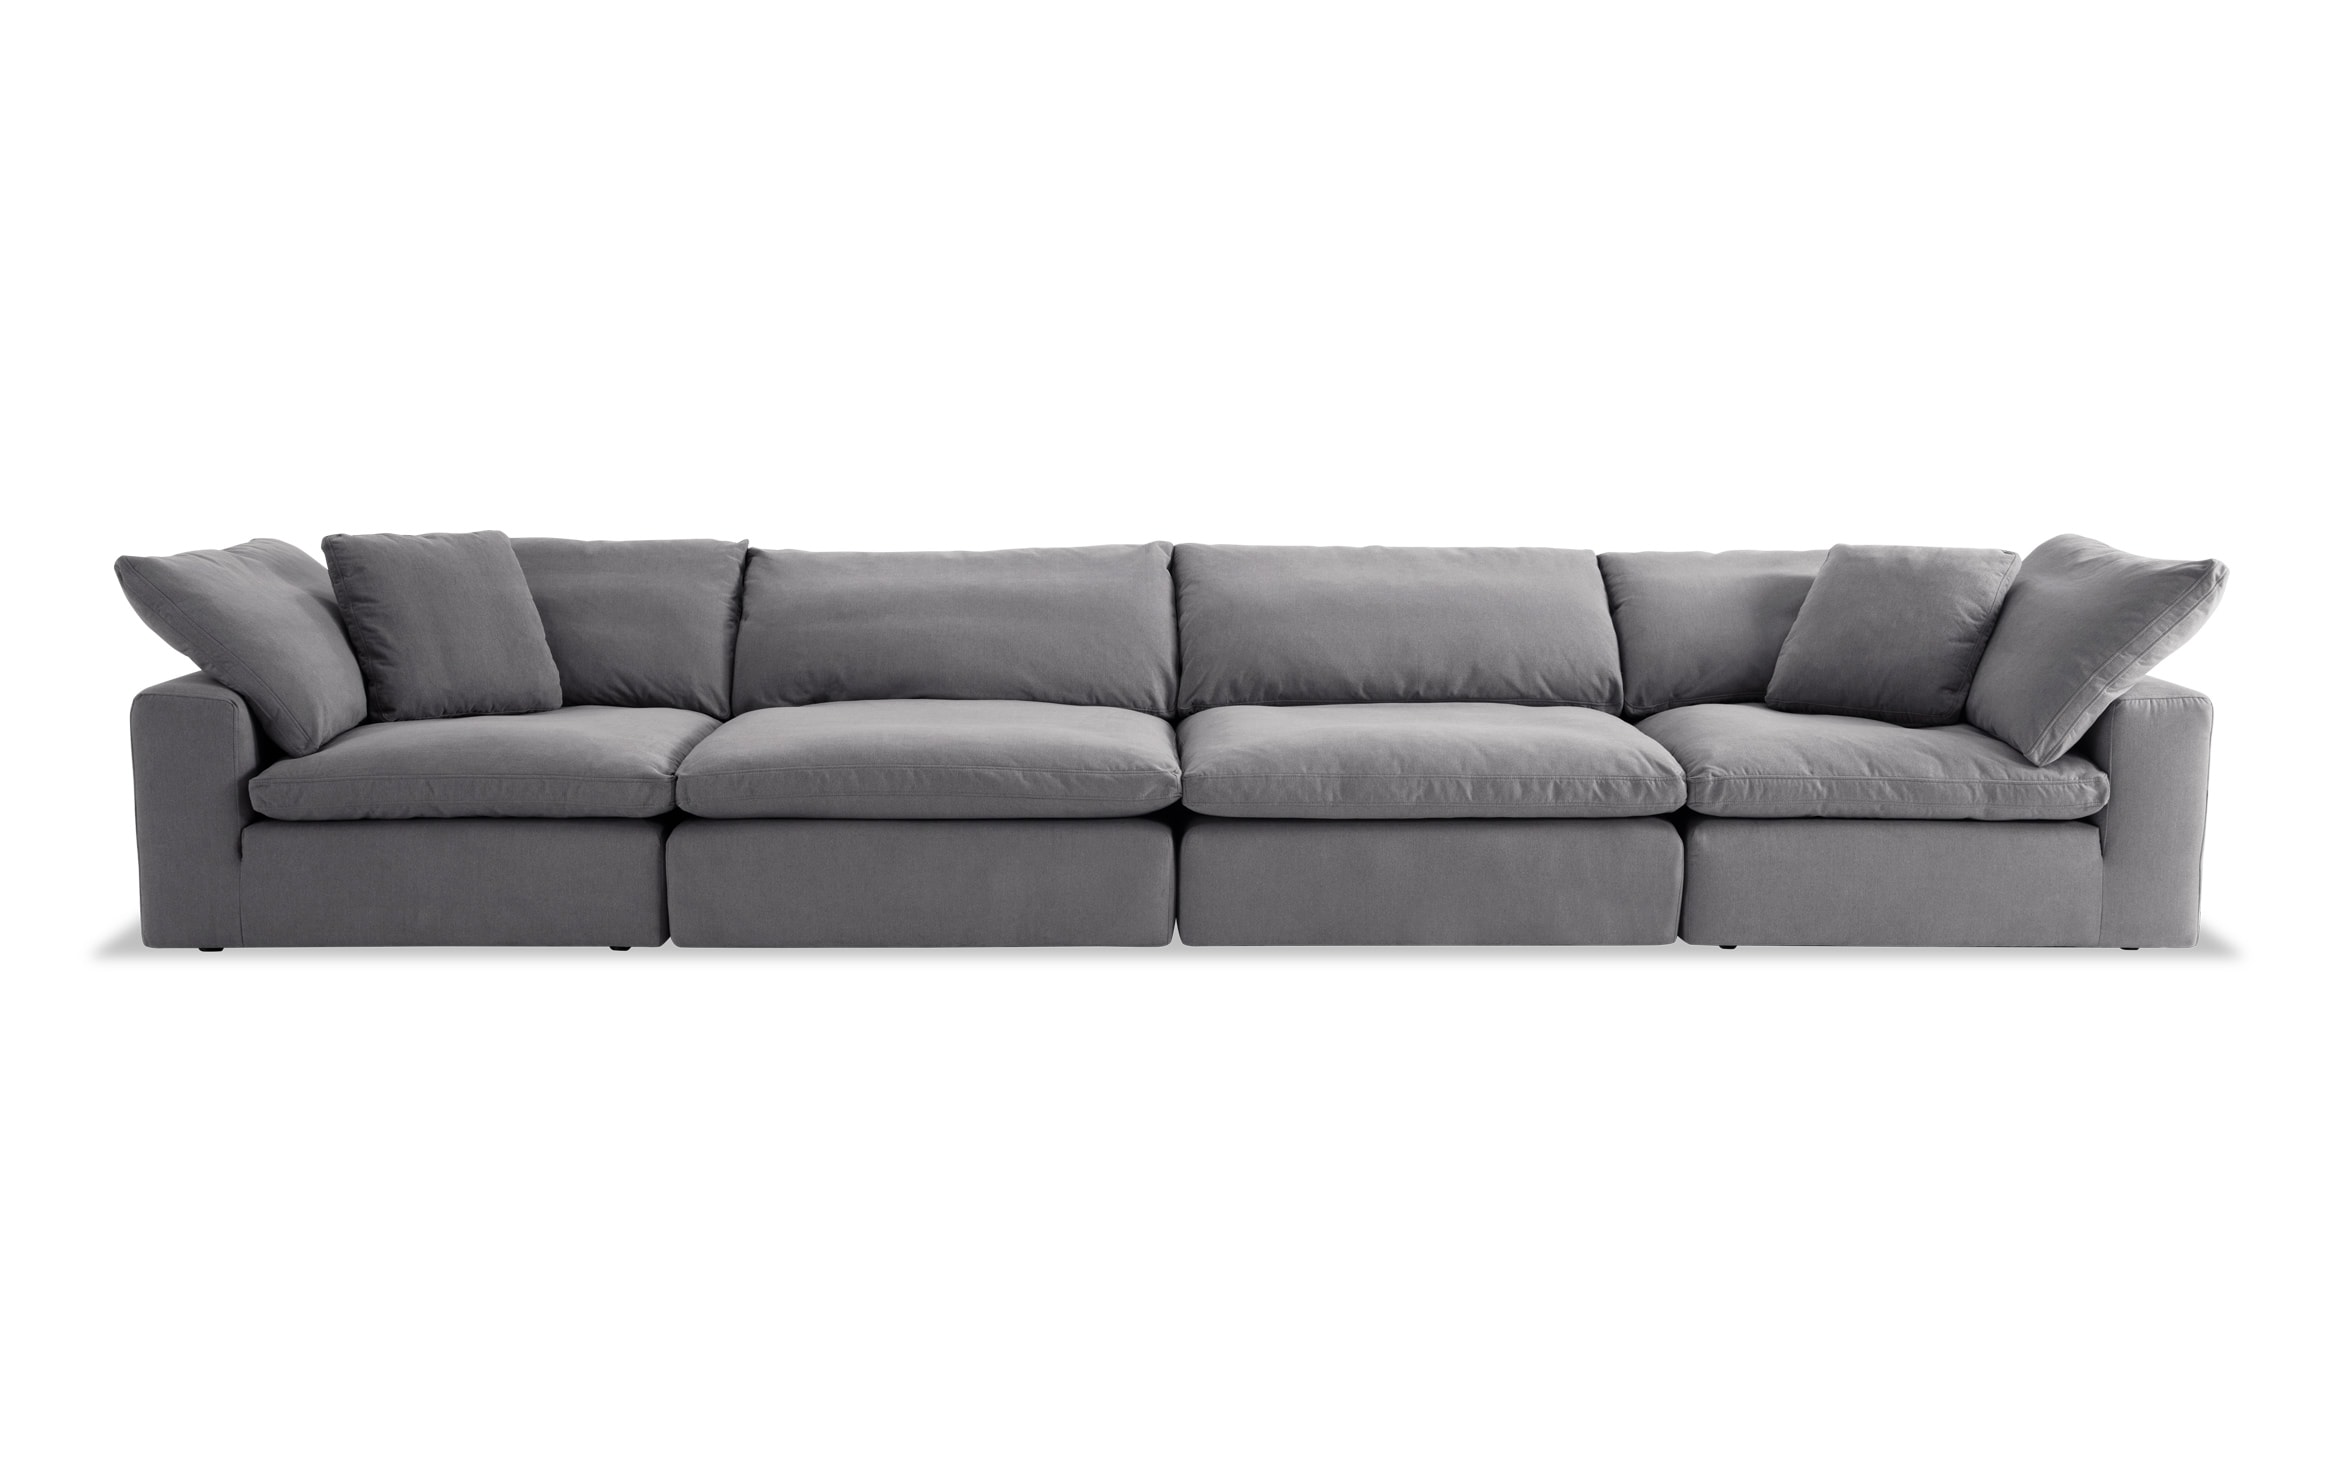 A bobs discount furniture Dream Gray 174'' Modular 4 Piece Sectional 2 Corners, 2 Armless Chairs